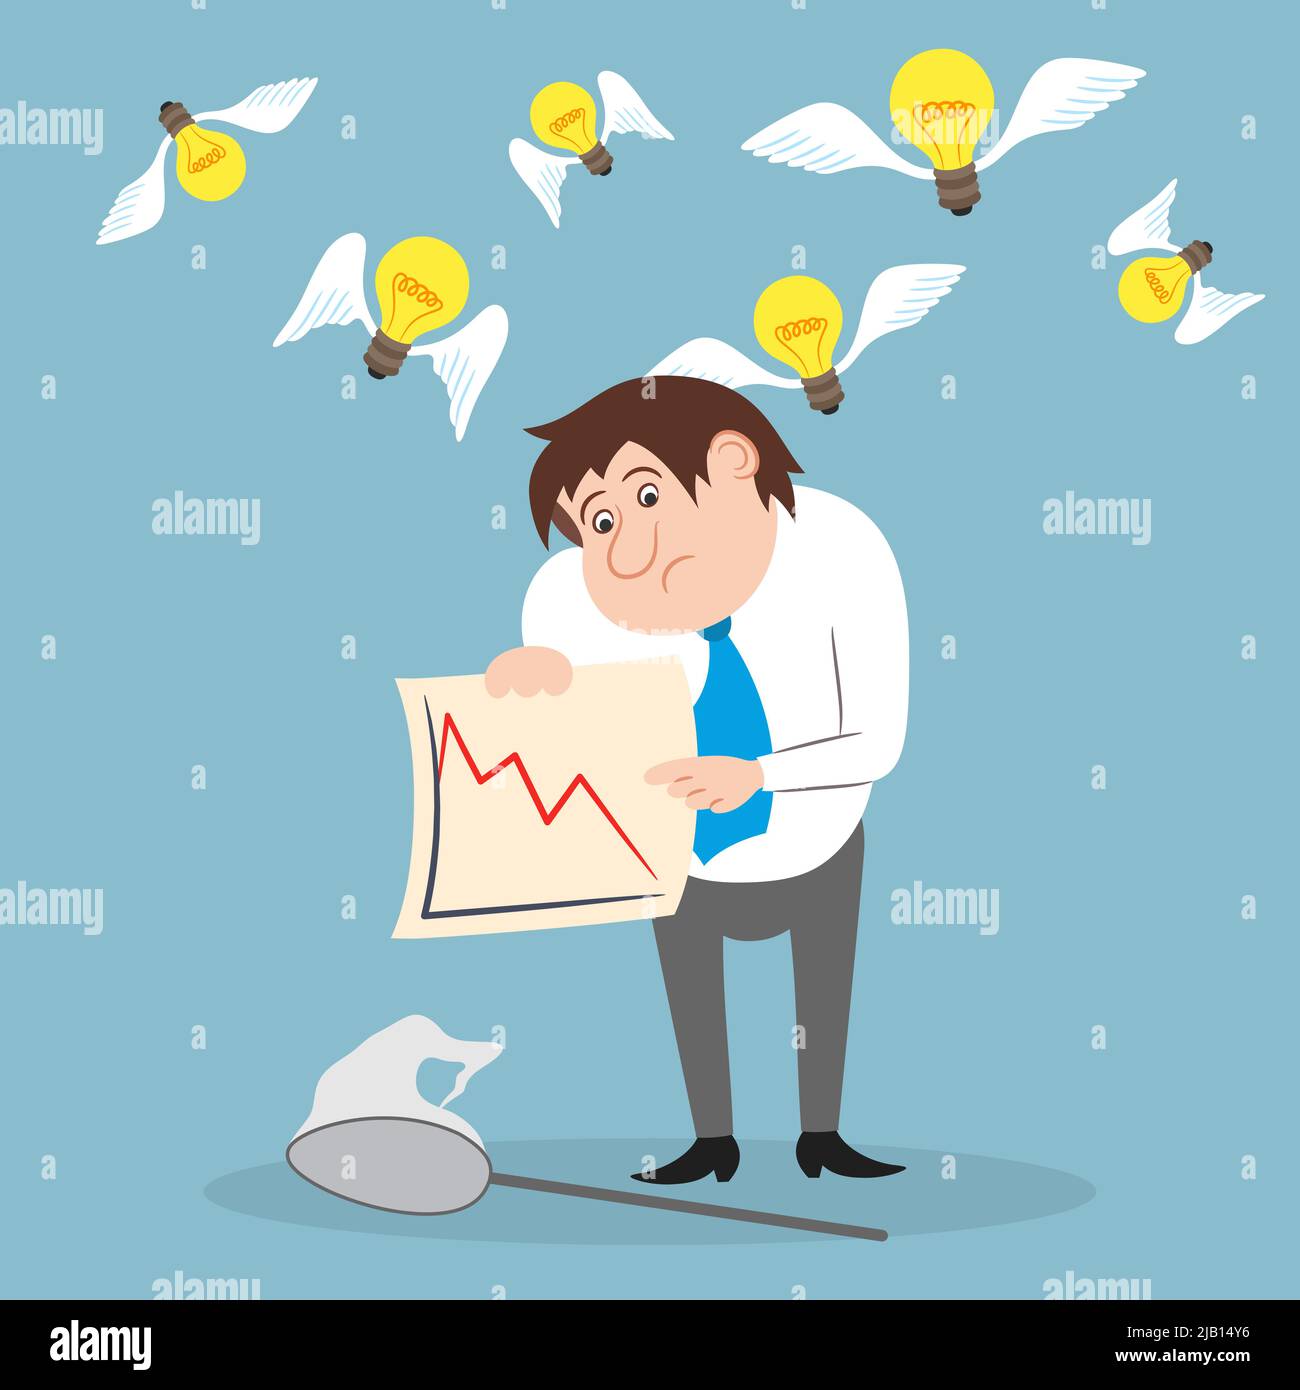 Businessman unhappy with stock trading graph and empty net isolated vector illustration Stock Vector